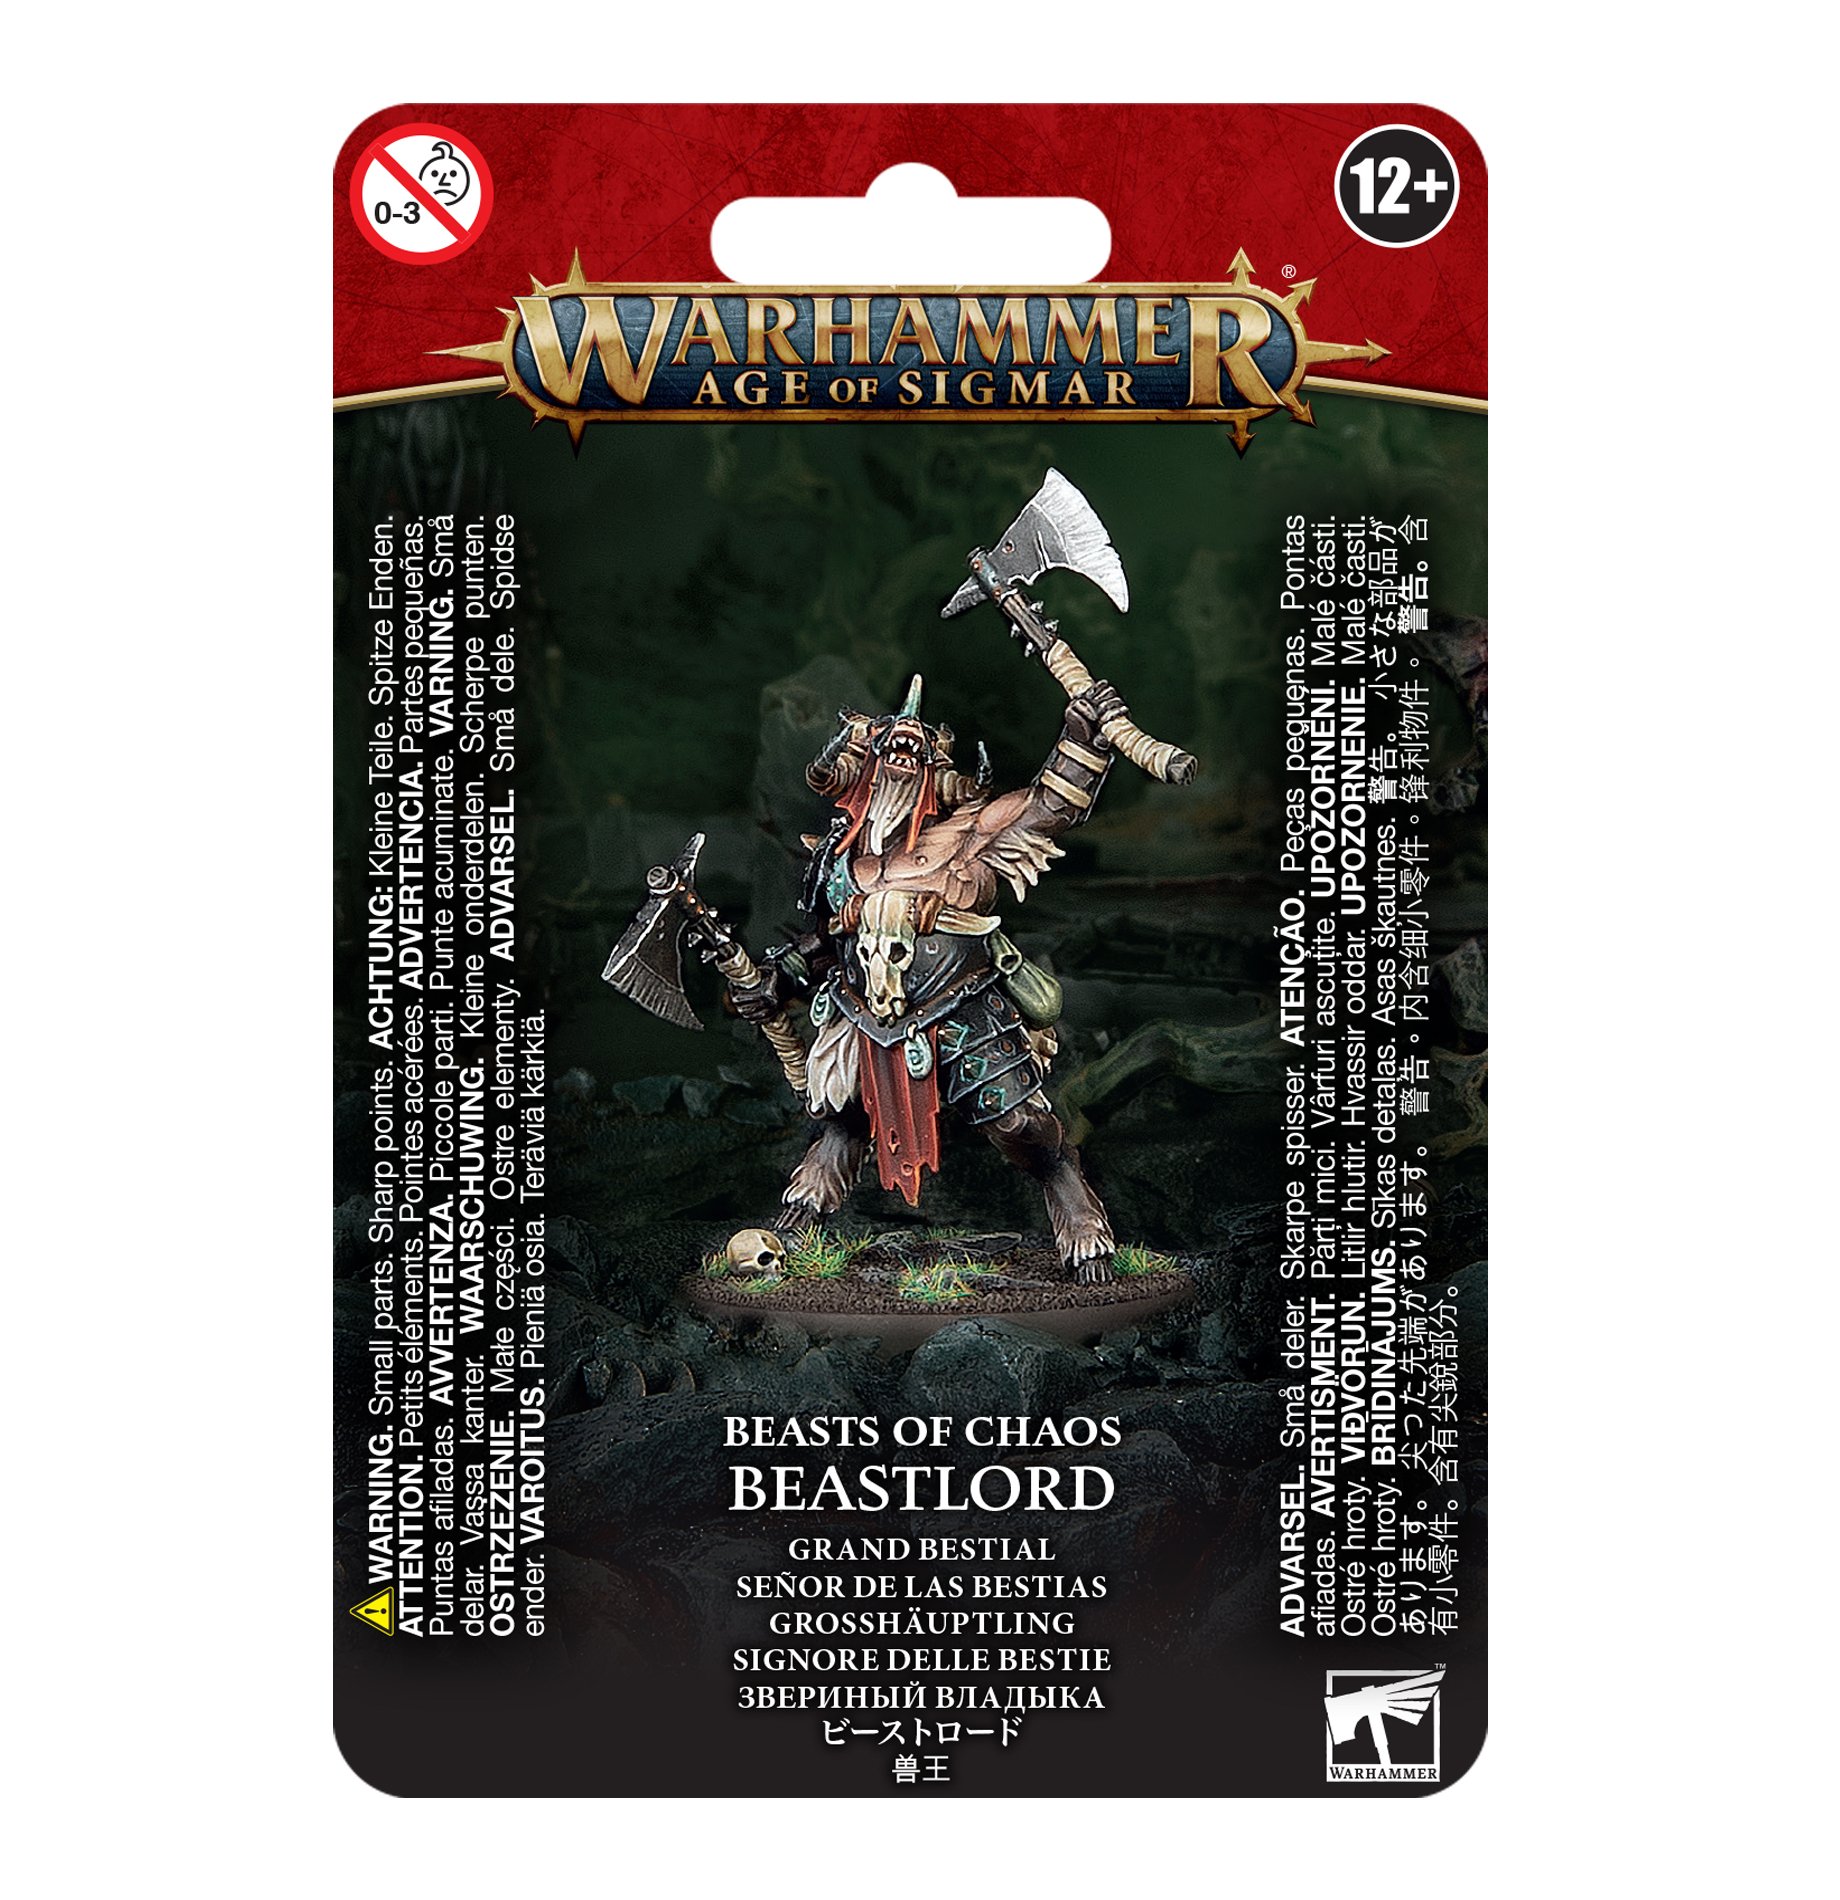 beast lord blister pack